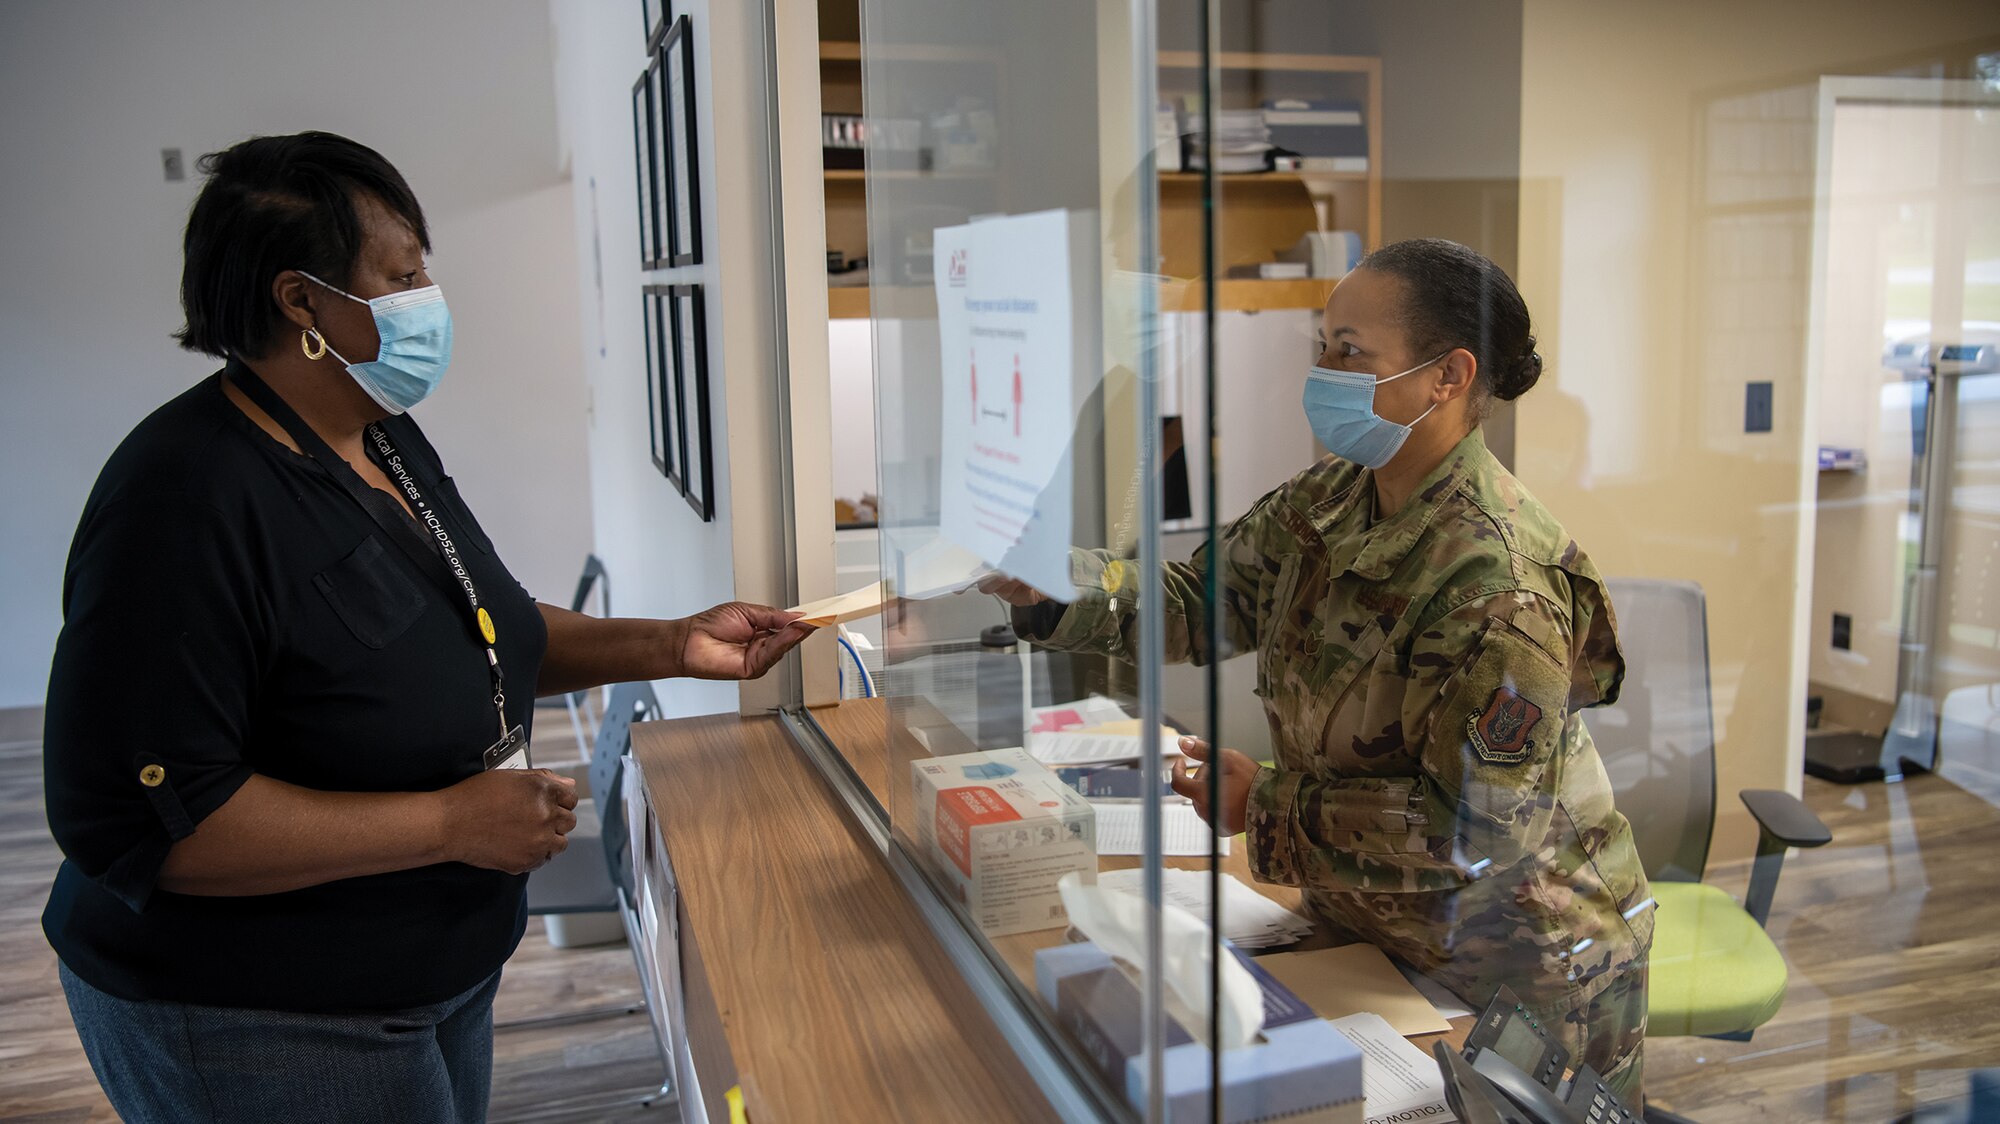 Tech. Sgt. Angela Thompson, 445th Aeromedical Staging Squadron medical administrator, hands a chart to a patient prior to receiving care at Hancock County Health Department, Hancock, Georgia, as part of the East Central Georgia Medical Innovative Readiness Training conducted on June 10, 2021.